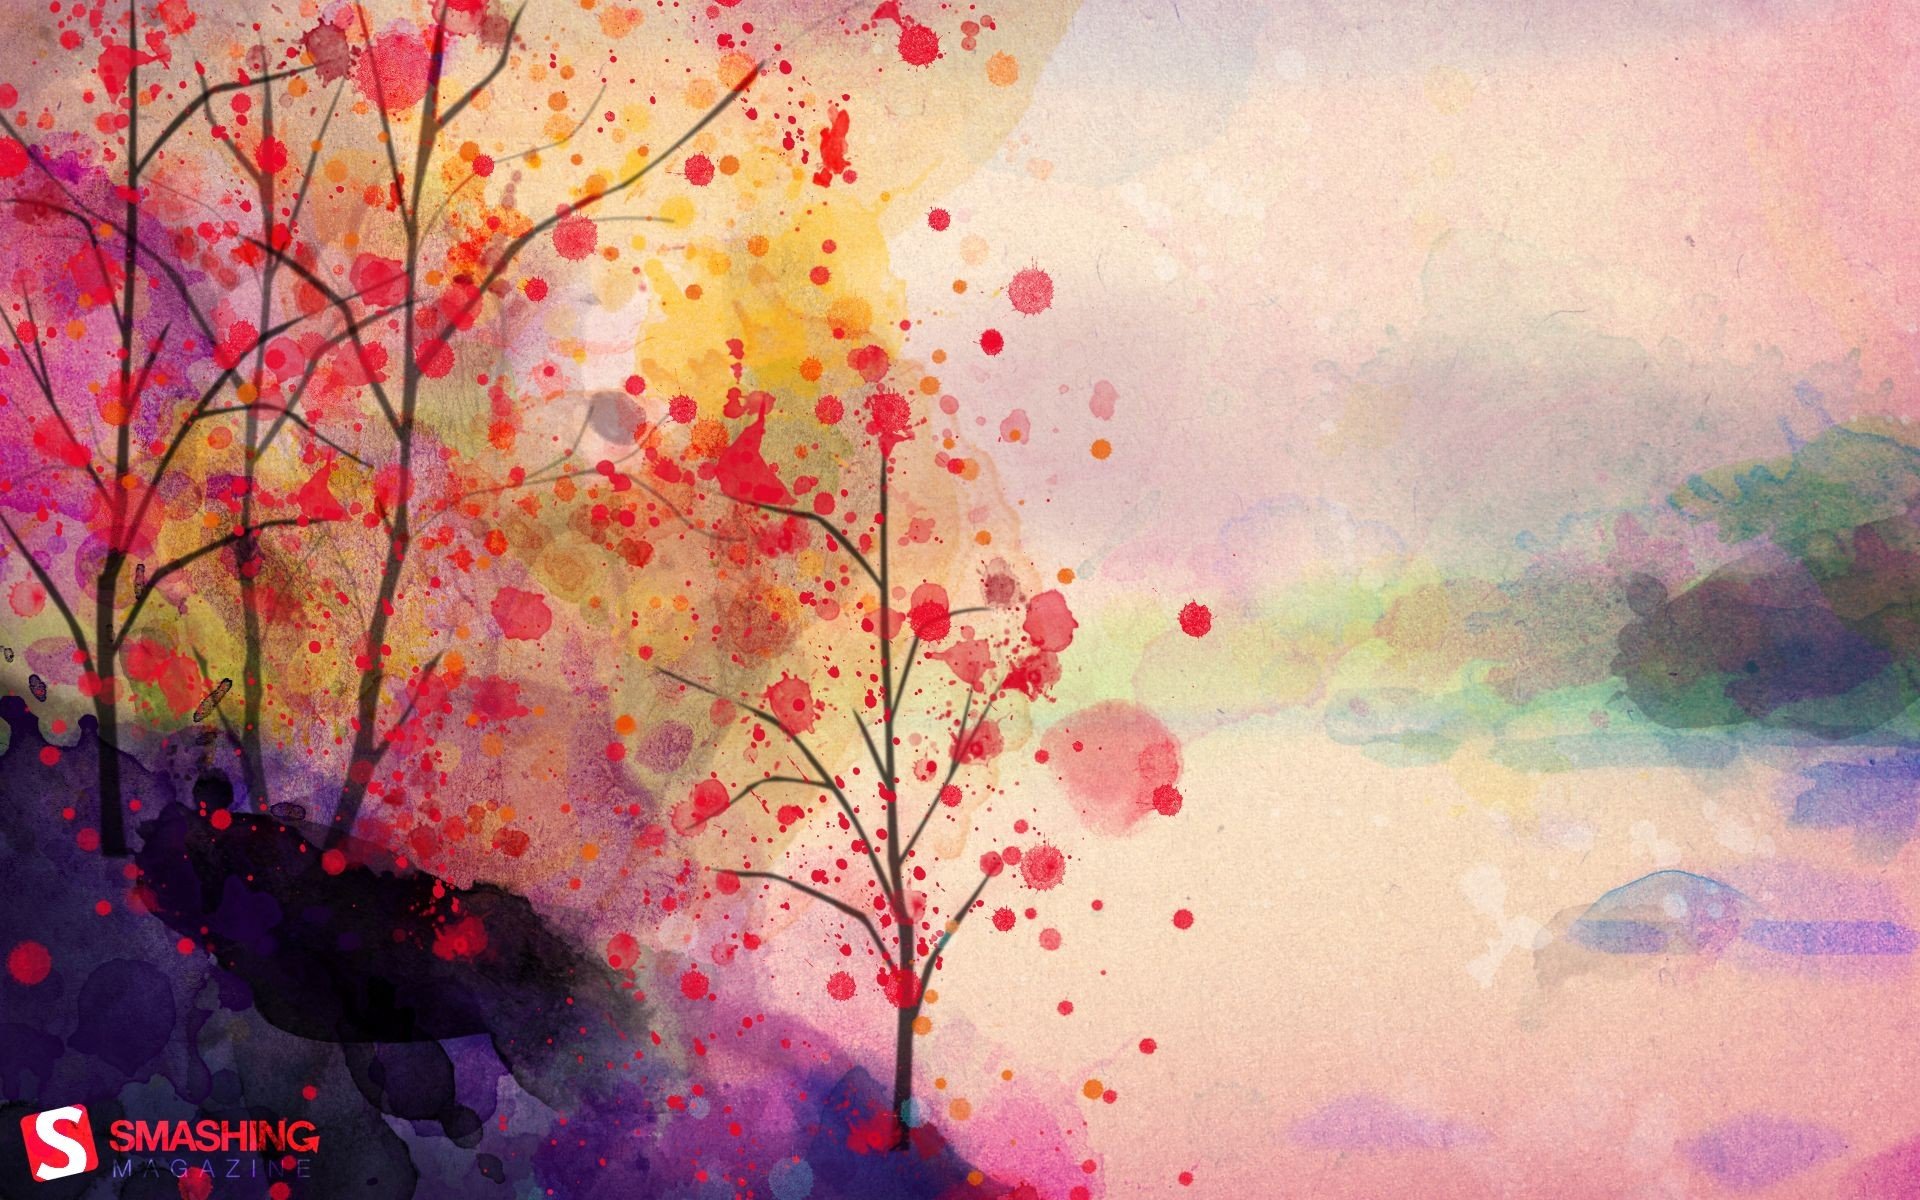 Watercolor Painting Landscapes - November Background For Desktop - 1920X1200 Wallpaper - Teahub.io